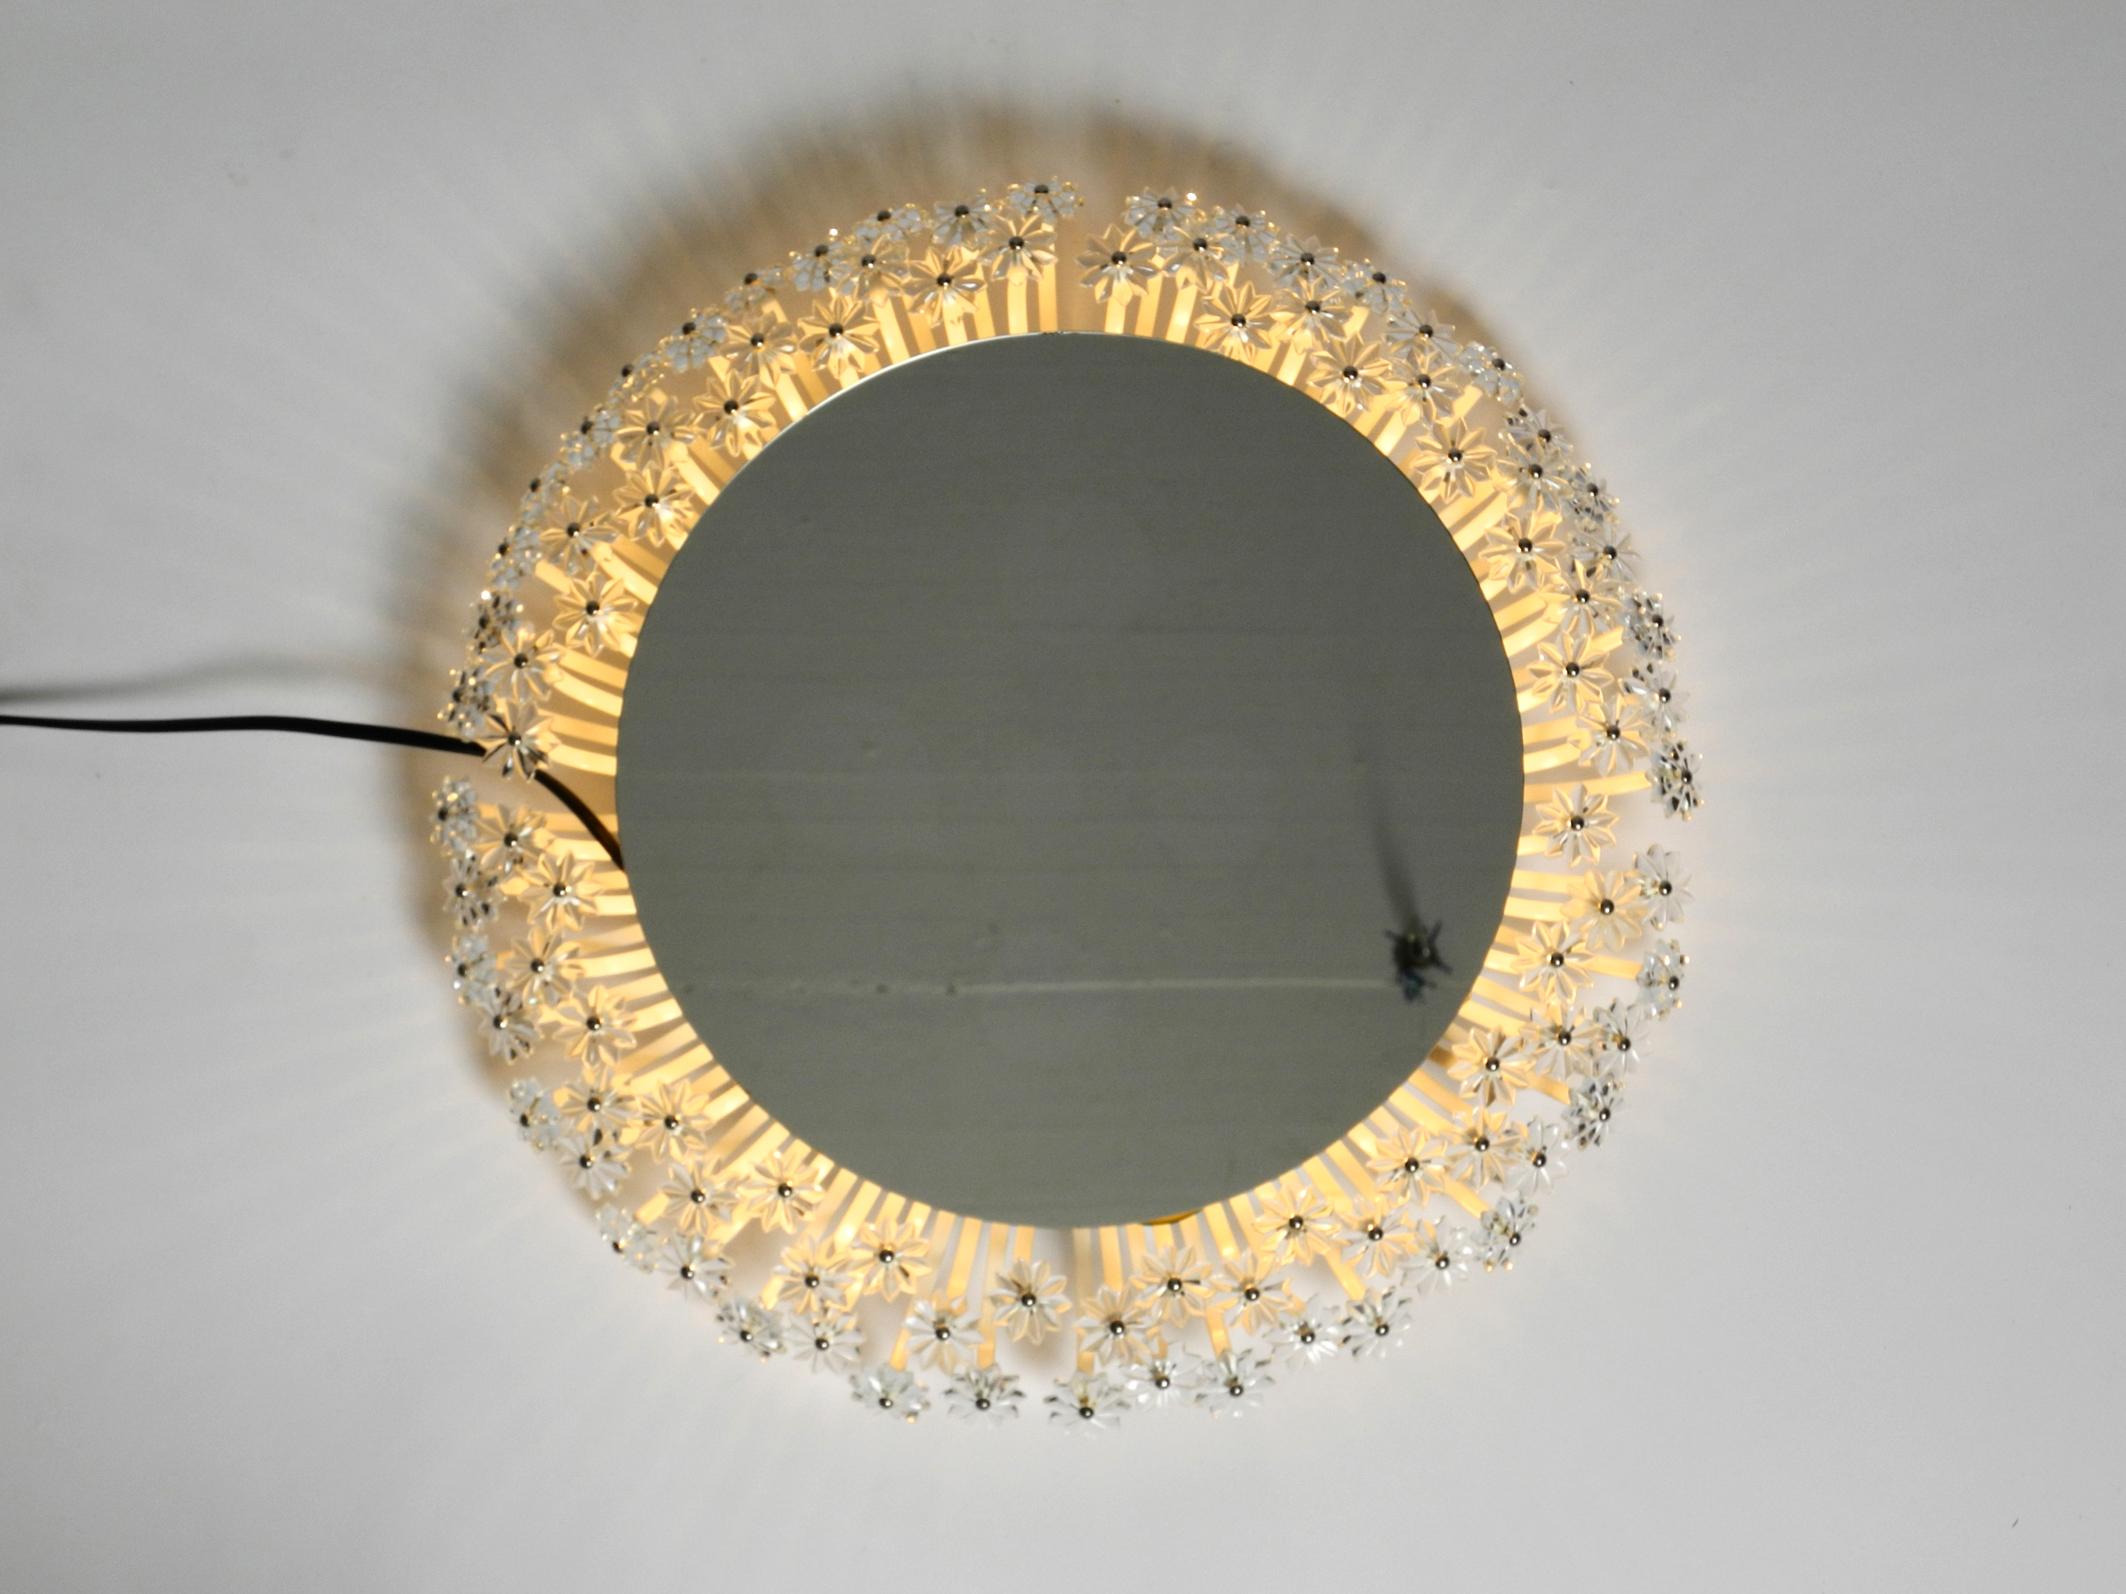 Beautiful rare background illuminated Mid-Century Modern mirror by Münchener Zierform. Manufacturer is Schöninger.
Great elaborate design with lots of small plastic flowers.
It is illuminated from the back with an E27 bulb with a maximum of